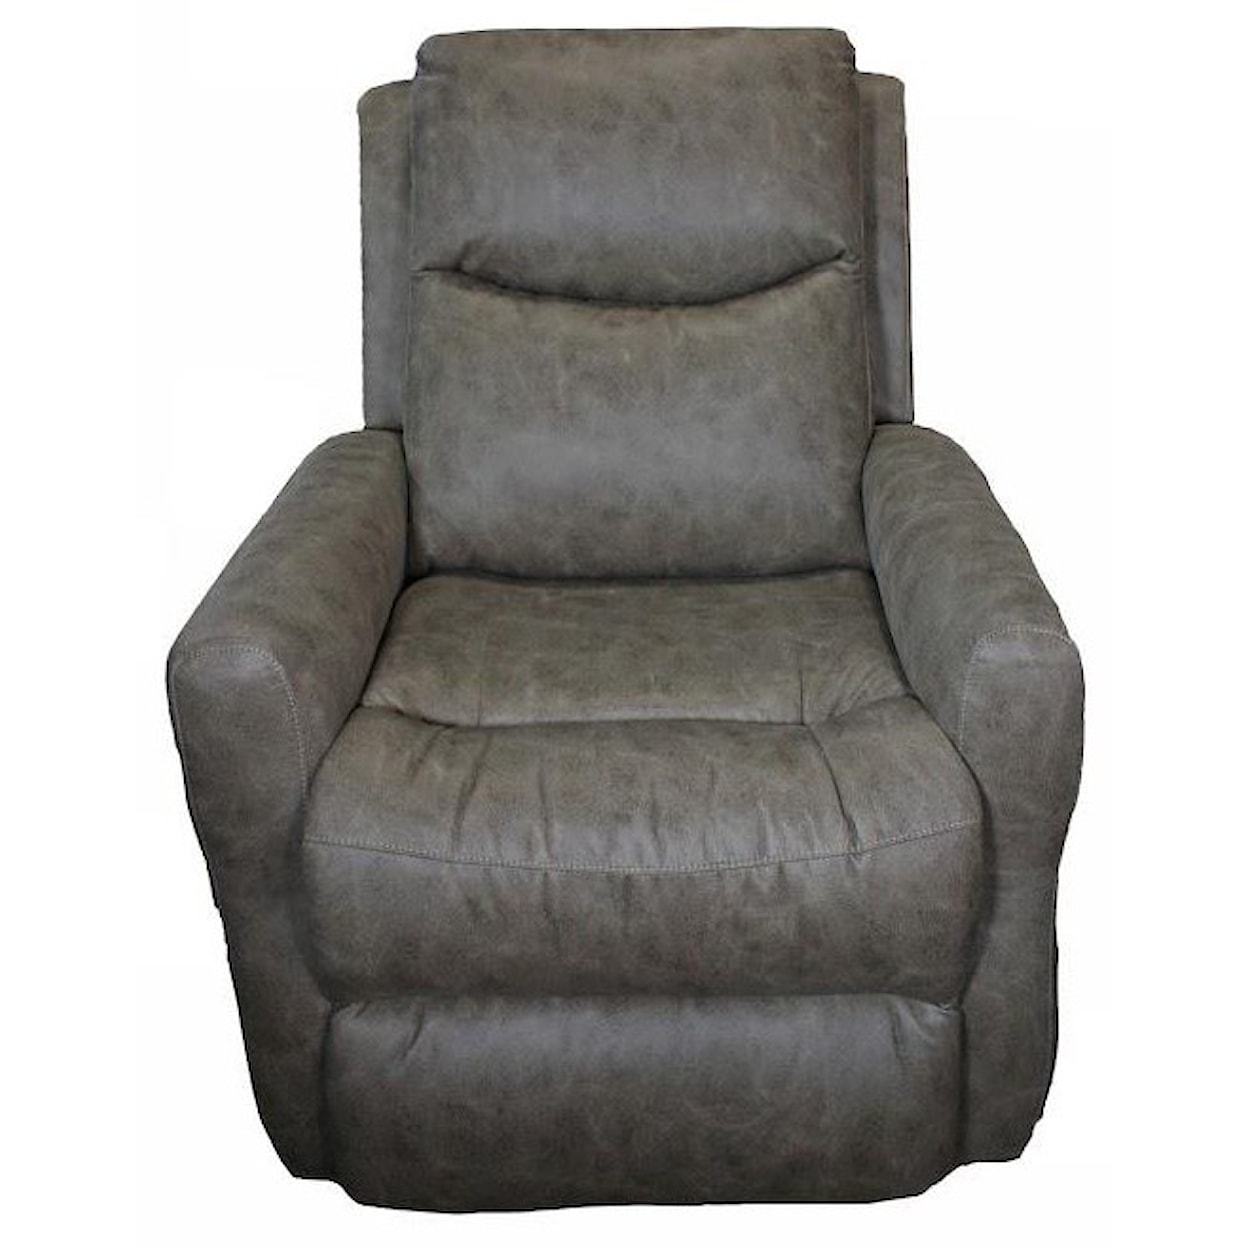 Southern Motion Recliners Fame Rocker Recliner with Swivel